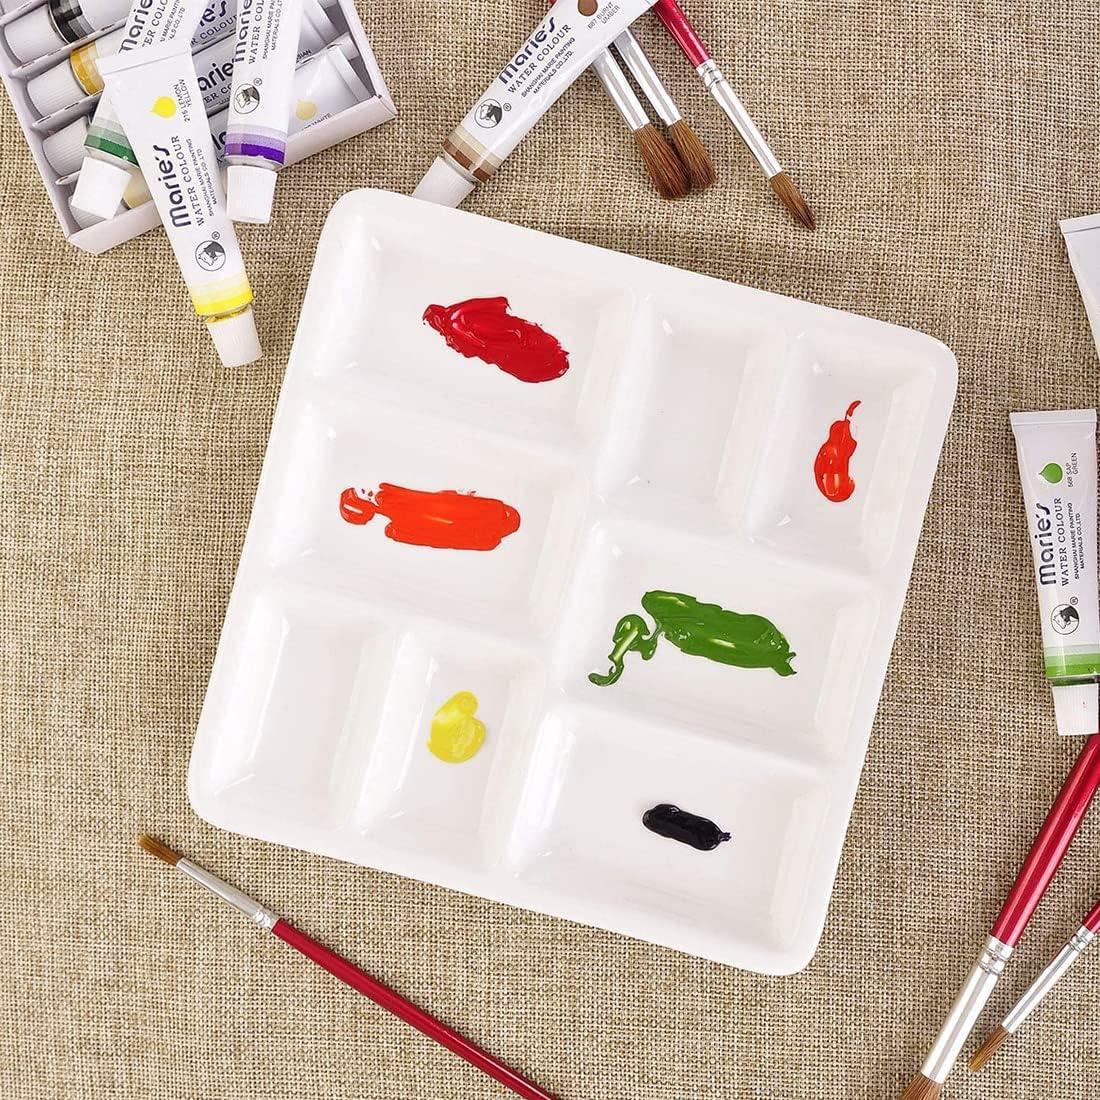 Gemerglity 13-well Porcelain Artist Paint Palette, Mixing Ceramic Watercolor Palette, Mixing Tray for Watercolor Gouache Acrylic Oil PAI